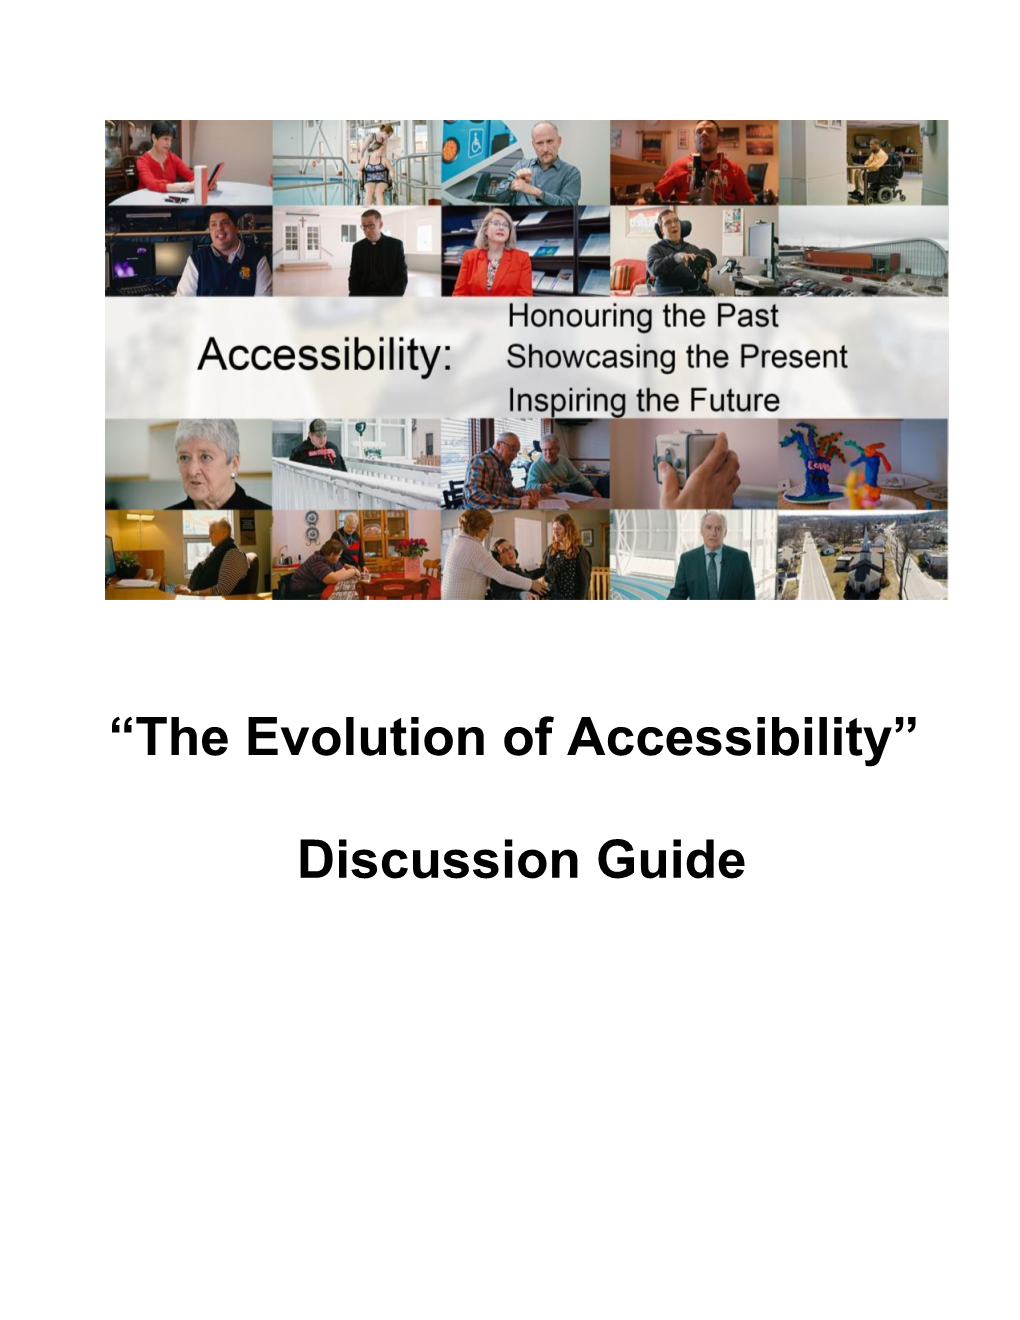 The Evolution of Accessibility